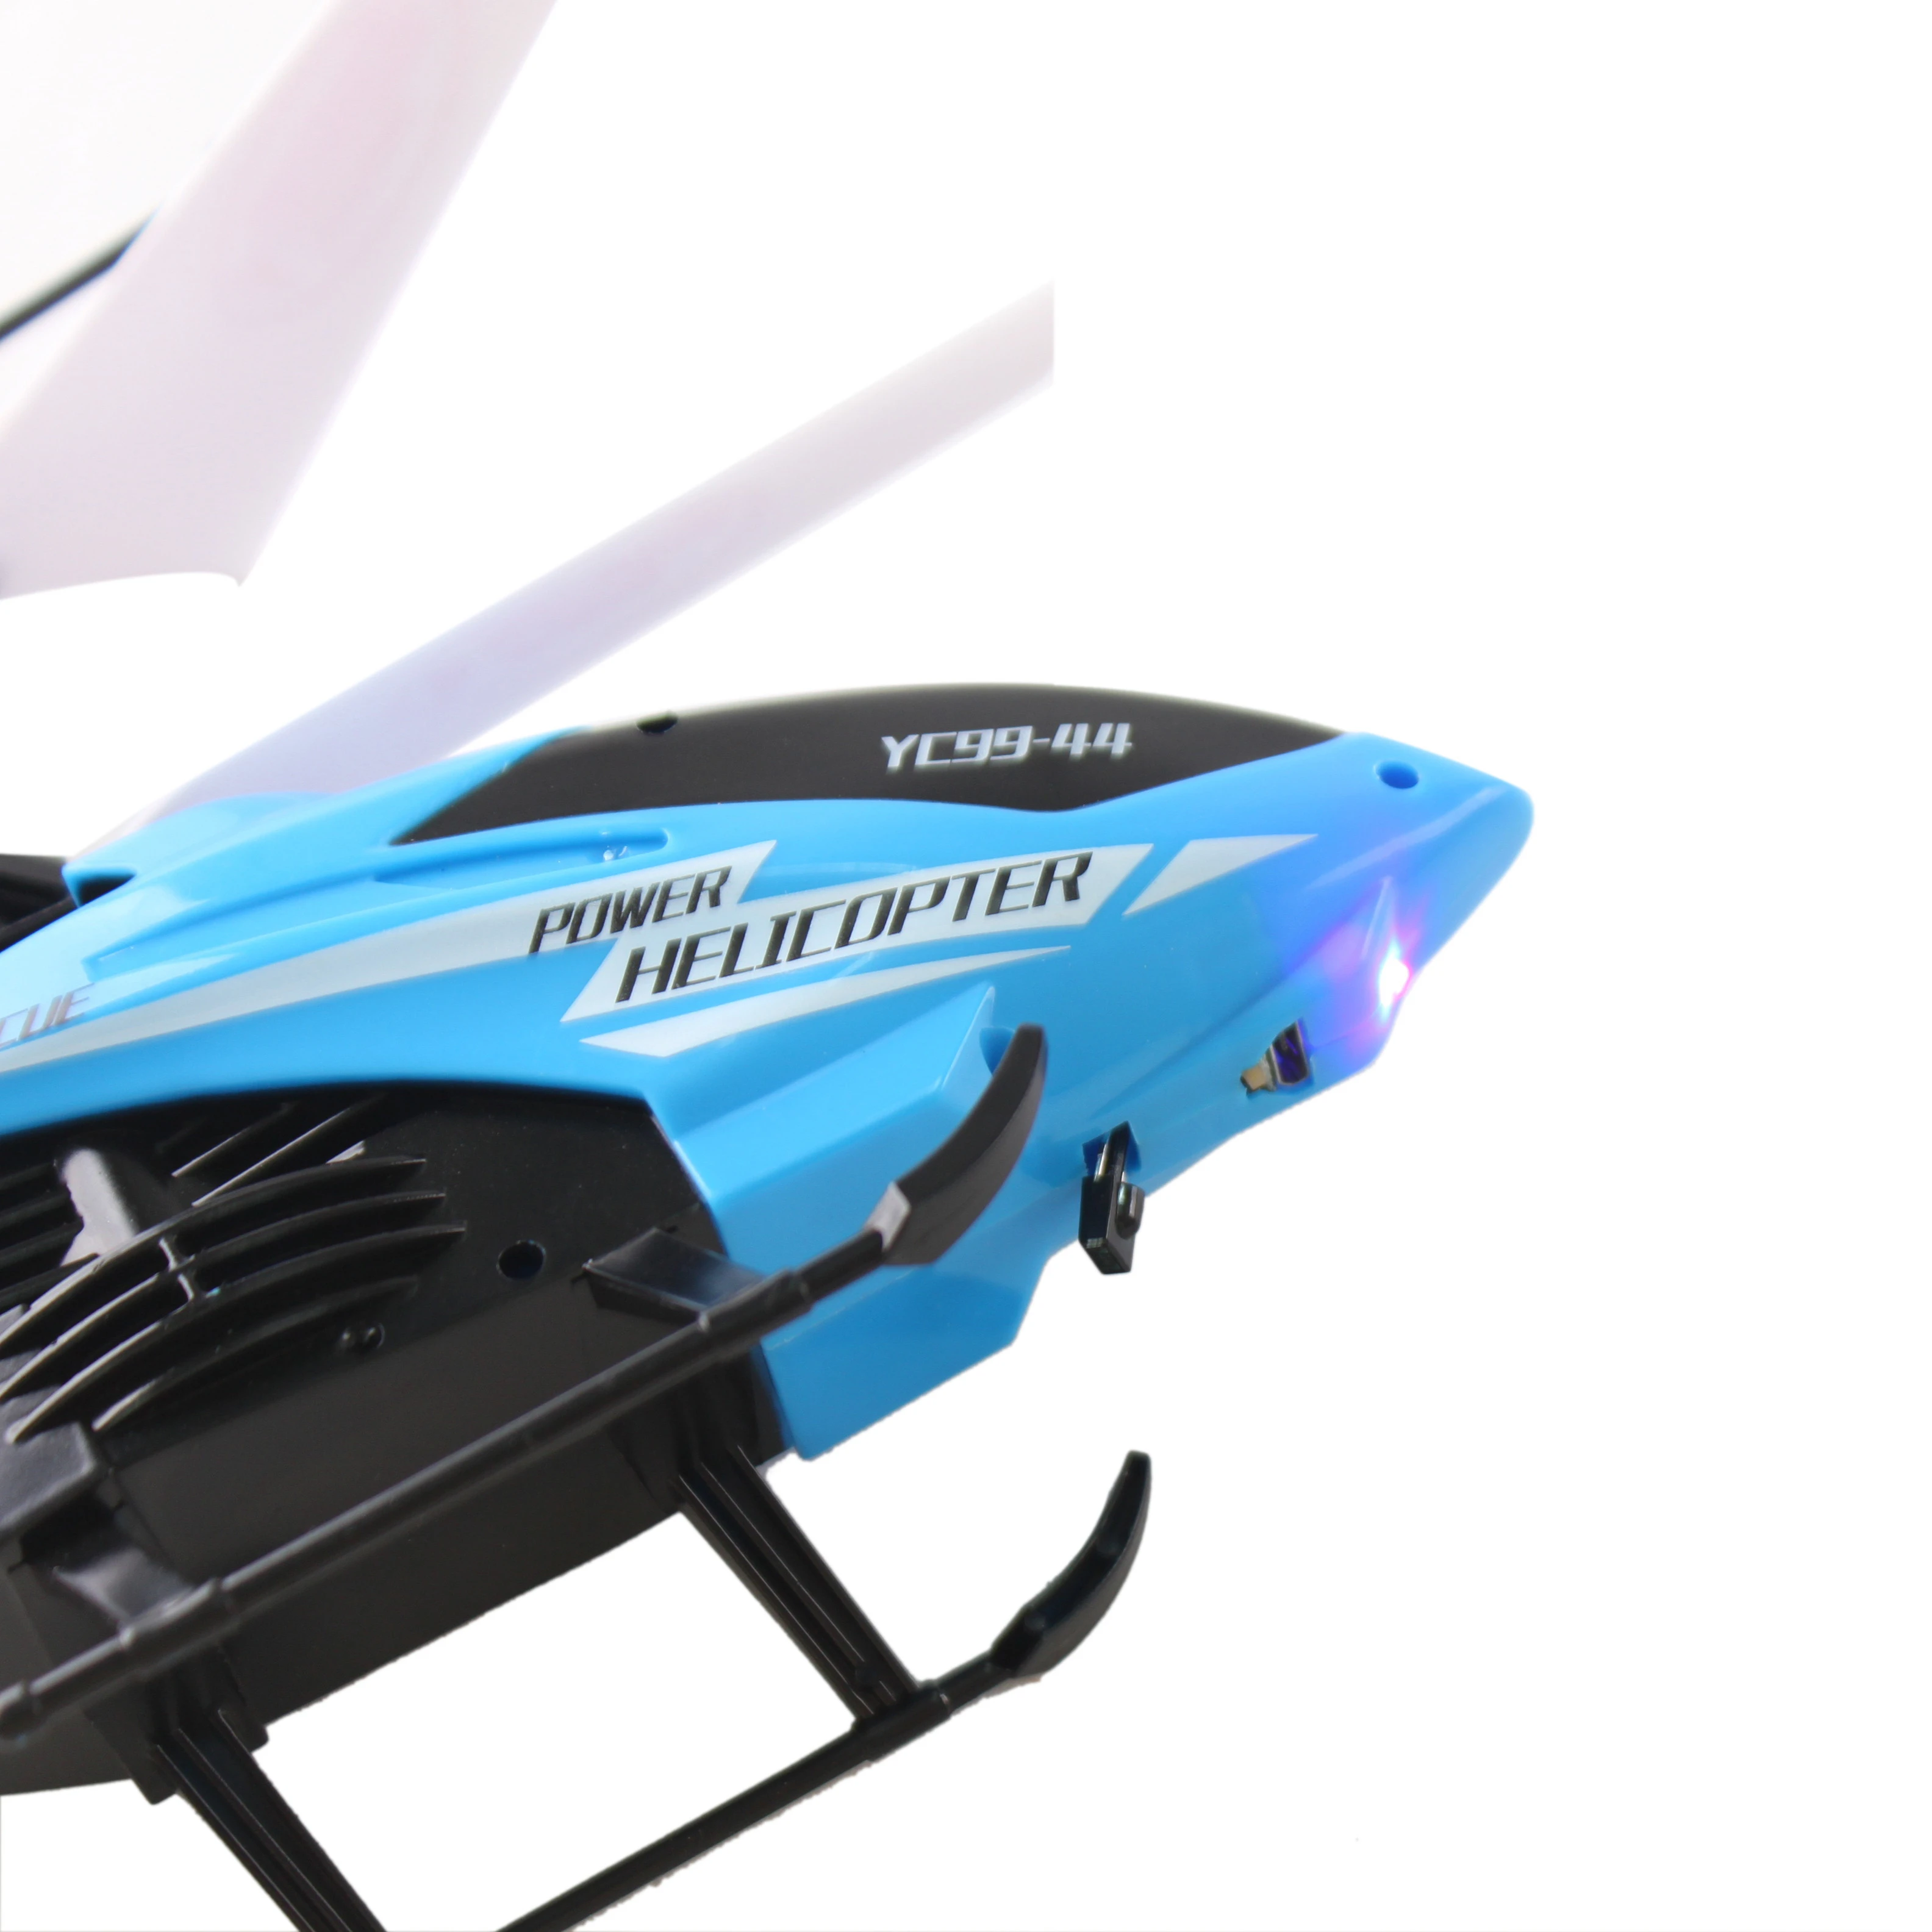 Yicheng New Design 2.5ch Rc helicopter airplane remote control toys,Kids helicopter radio control toys remote control helicopter